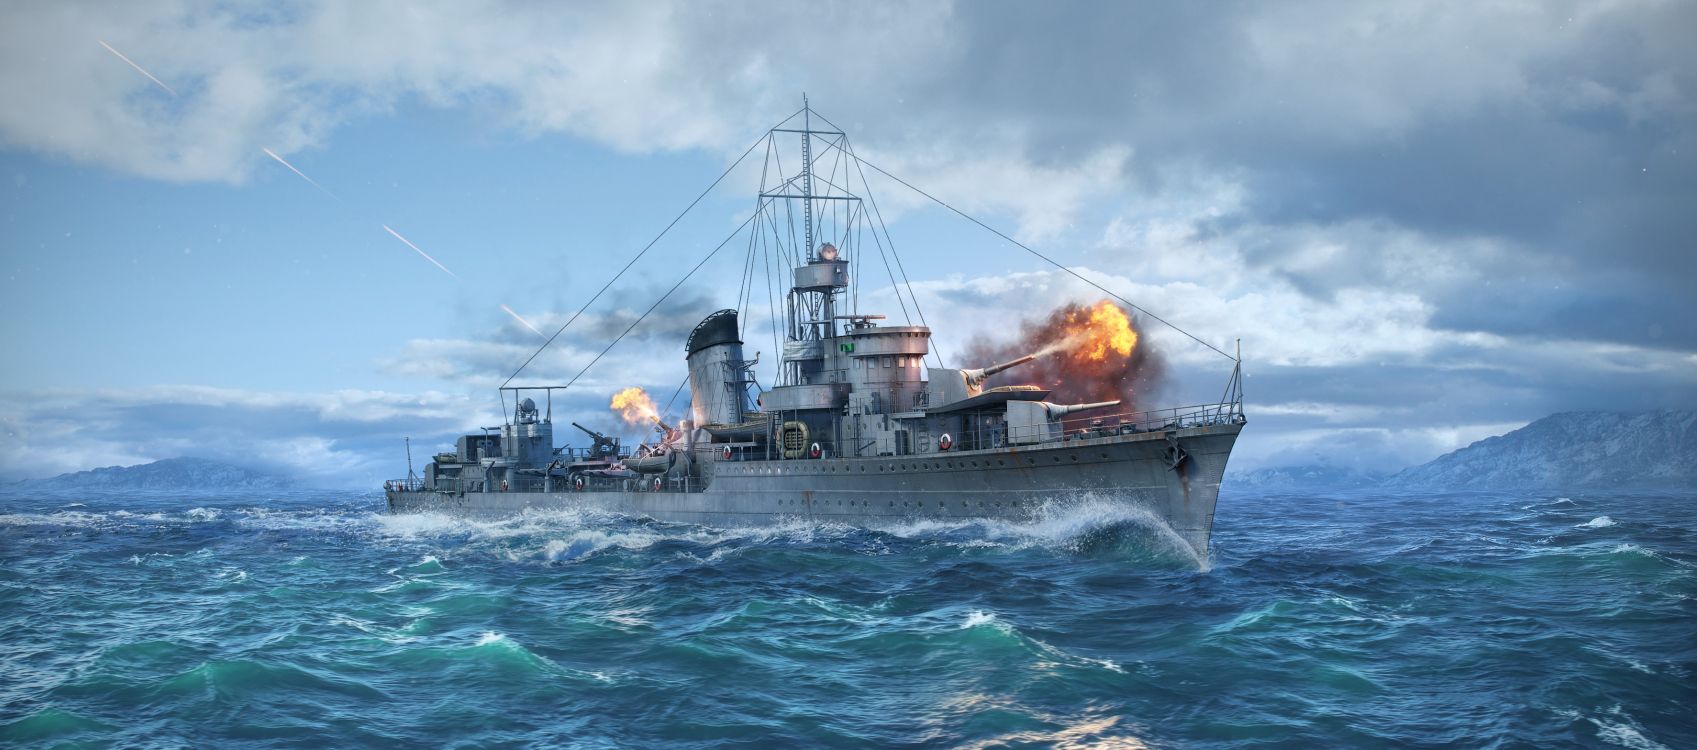 World of Warships, Destroyer, Warship, Naval Ship, Boat. Wallpaper in 3548x1568 Resolution